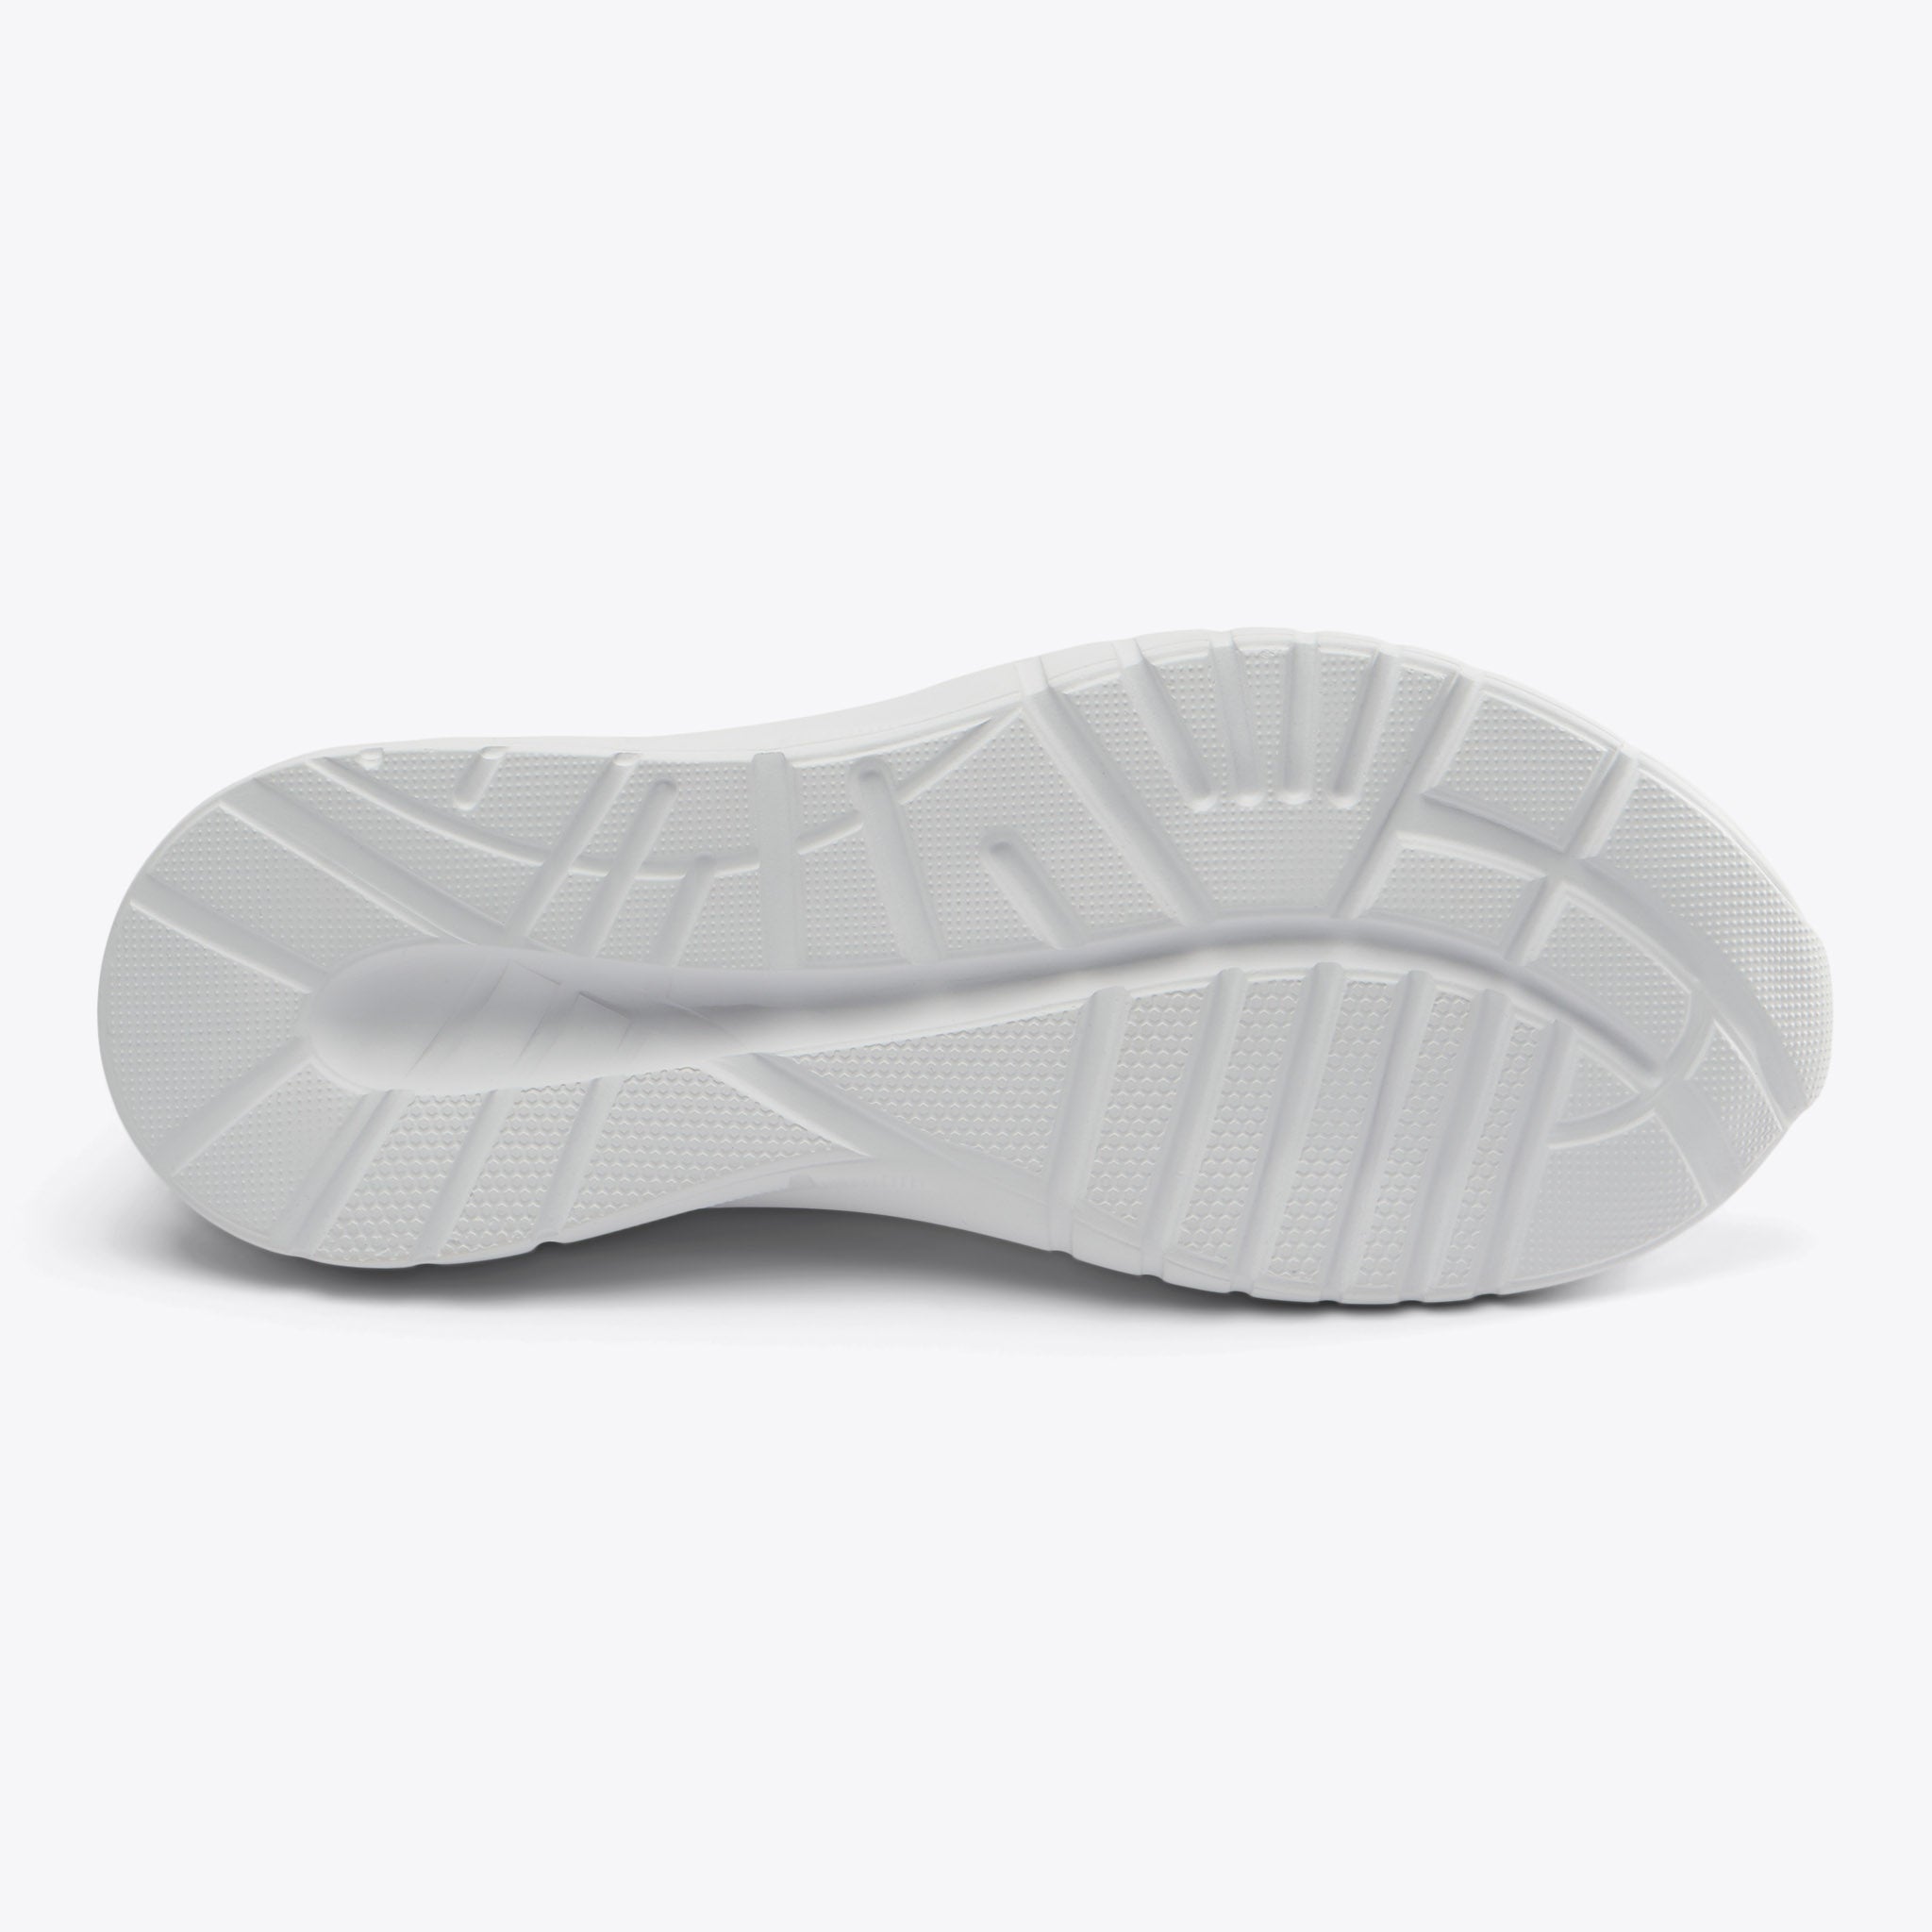 Product Image 4 of the Men's Athleisure Sneaker White Nisolo 